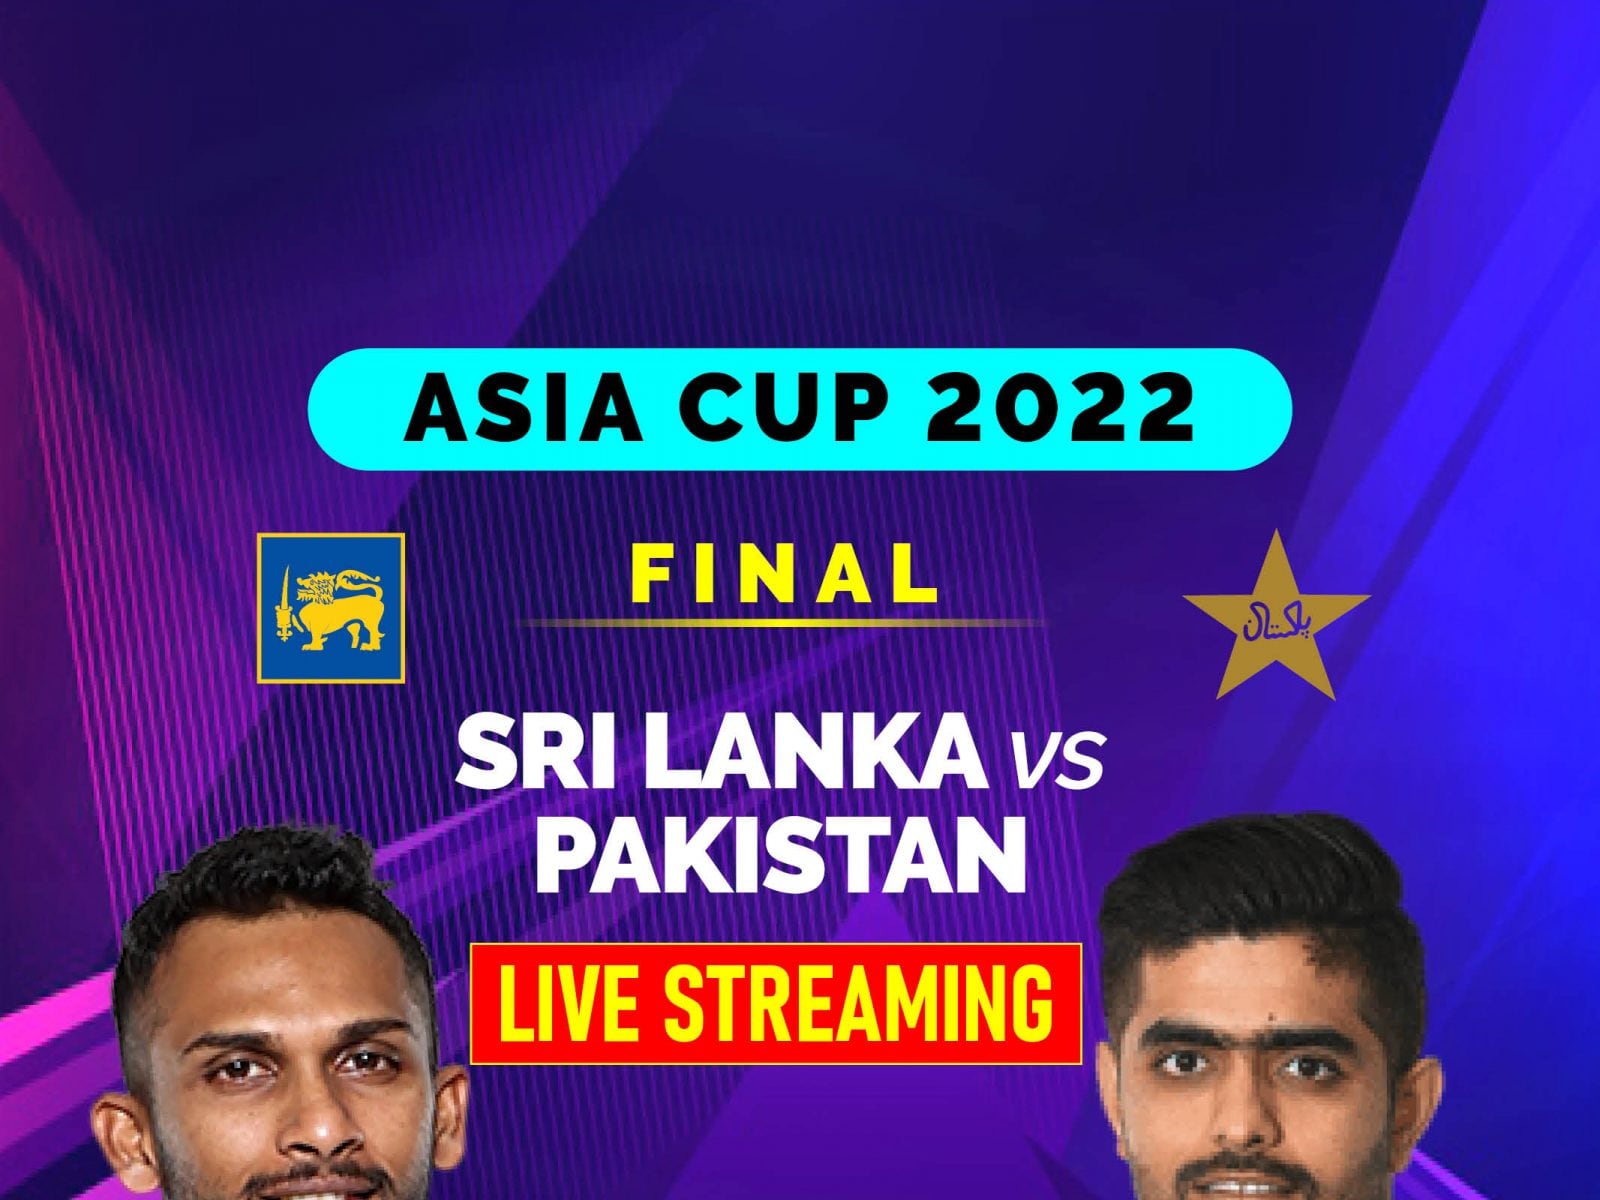 Sri Lanka vs Pakistan Live Cricket Streaming How to Watch Asia Cup 2022 Final Coverage on TV And Online in India